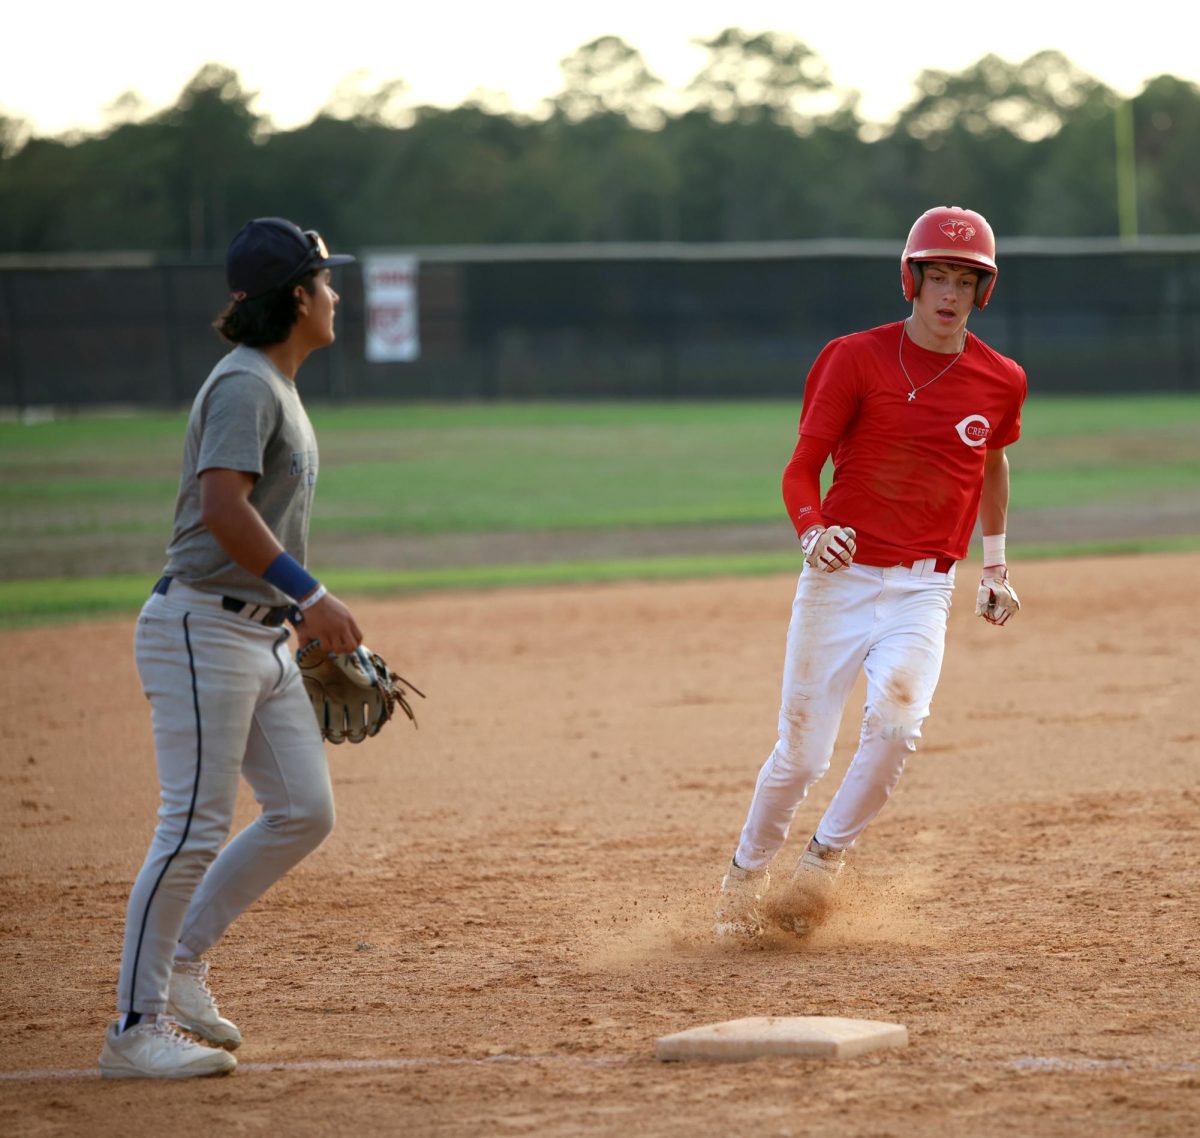 CHASE THE BAG. Junior Derek Darkenwald runs to 3rd base as the ball is out in play toward the left field on Sept. 6, 2023 at Caney Creek High School. Following the run to 3rd base, Darkenwald managed to complete the run to home base, scoring a point for his team. “We were down 5-3 at the top of the 6th inning,” Darkenwald said. “The first thing I thought in my mind was ‘I have to score and put points on the board,’ I ran as fast as I could and I eventually scored.”